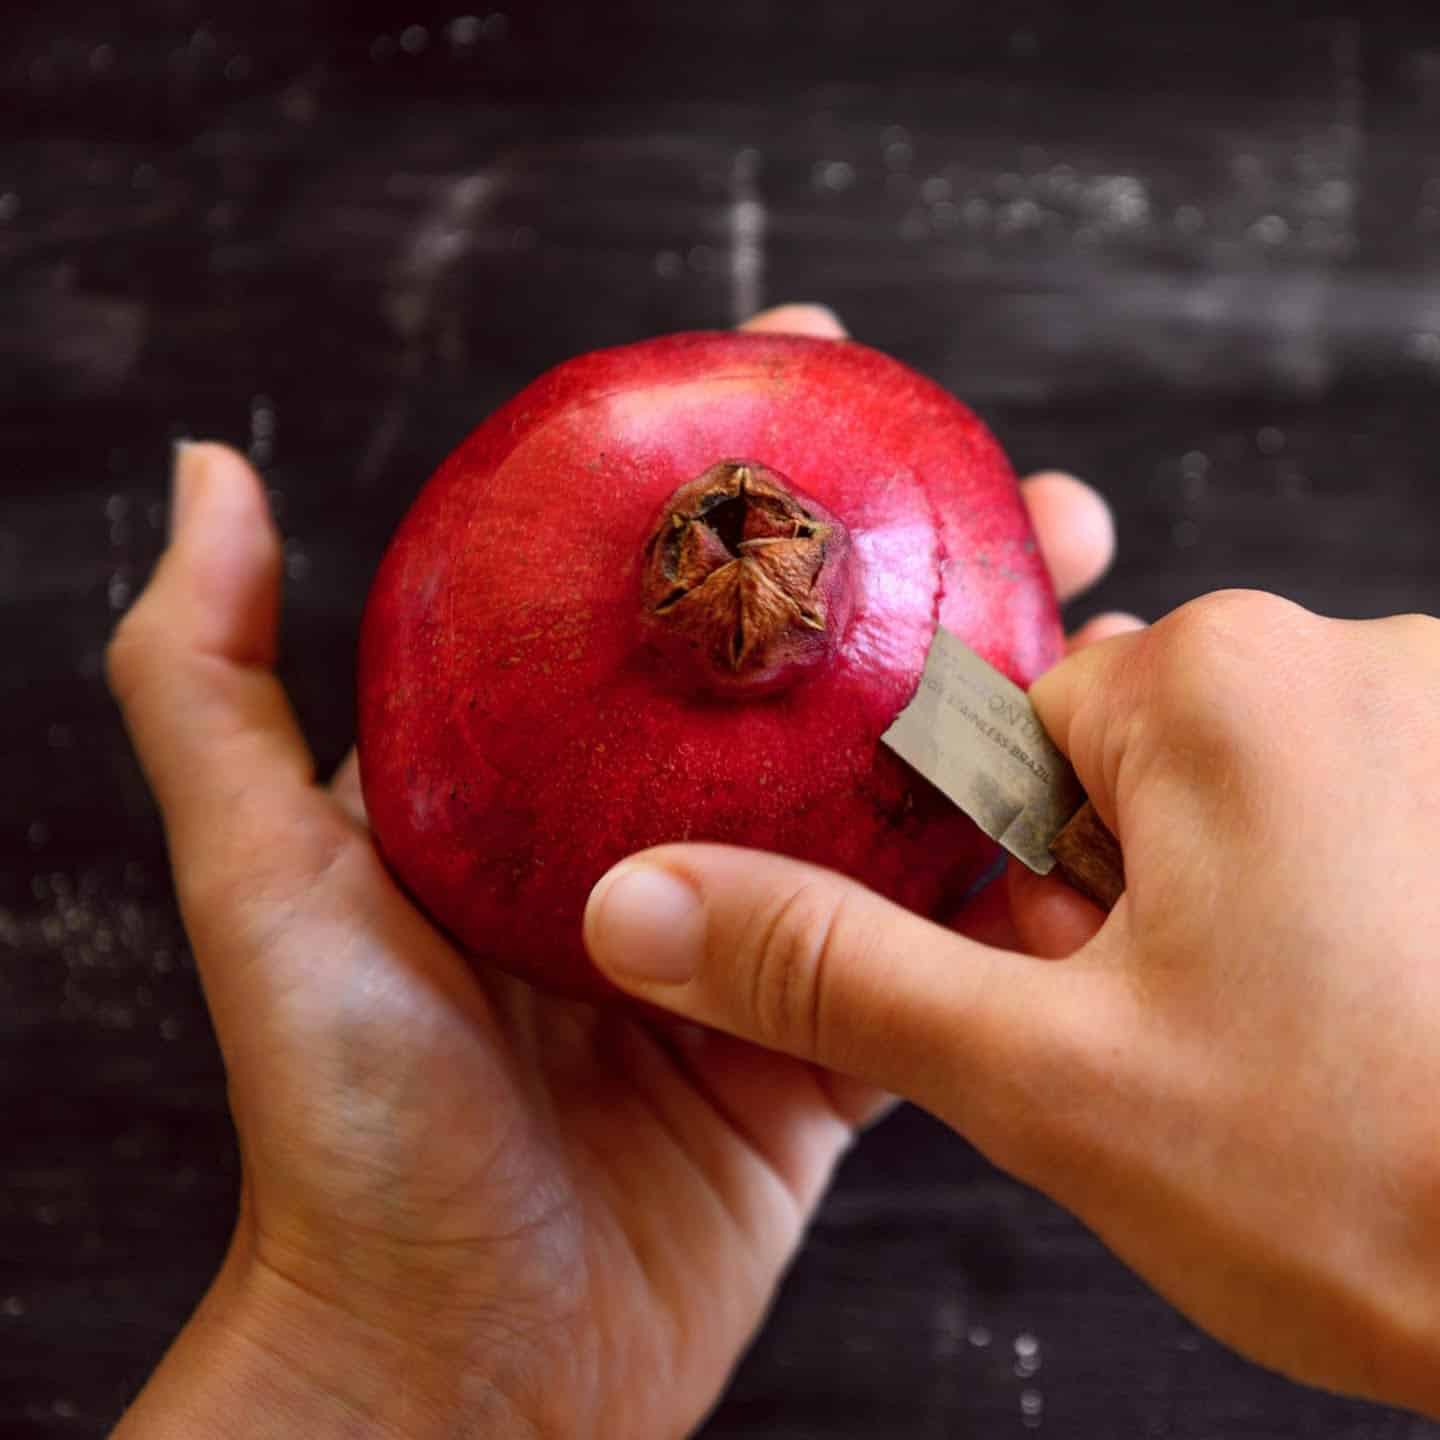 Cut the crown out of the pomegranate